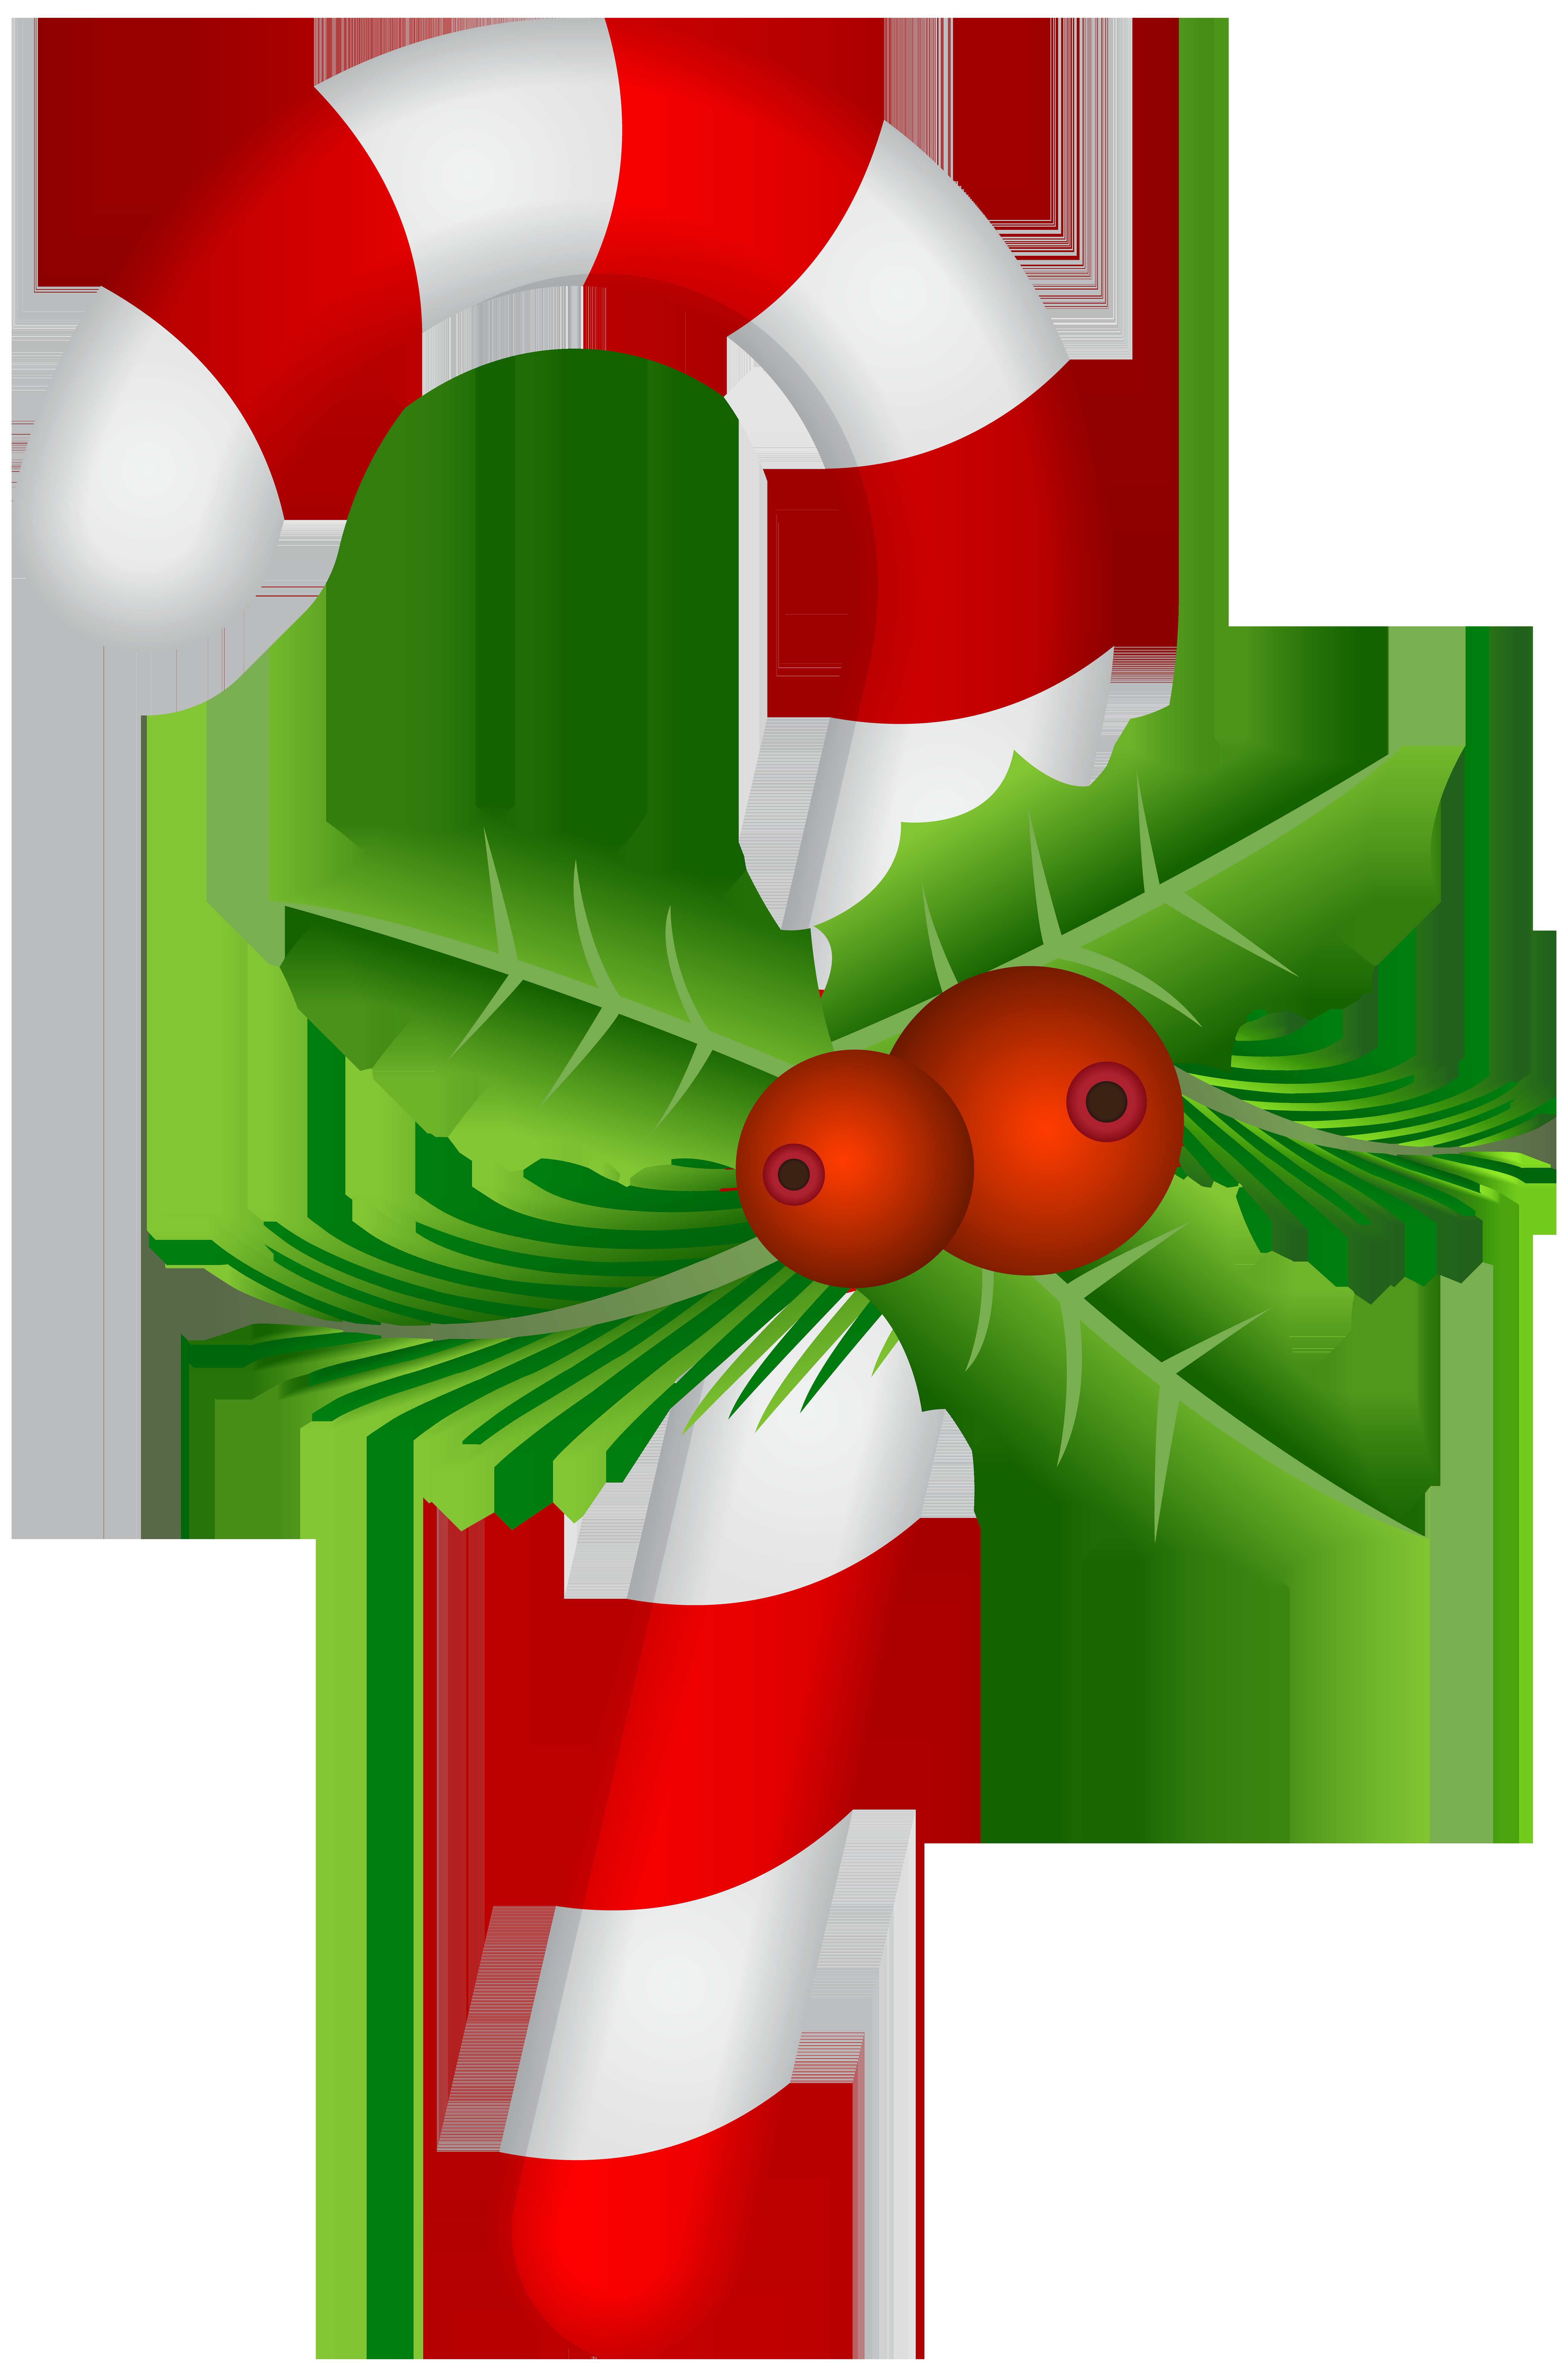 Christmas Candy Image
 Pin by Courtney Patterson on DESSETS CLIP ART